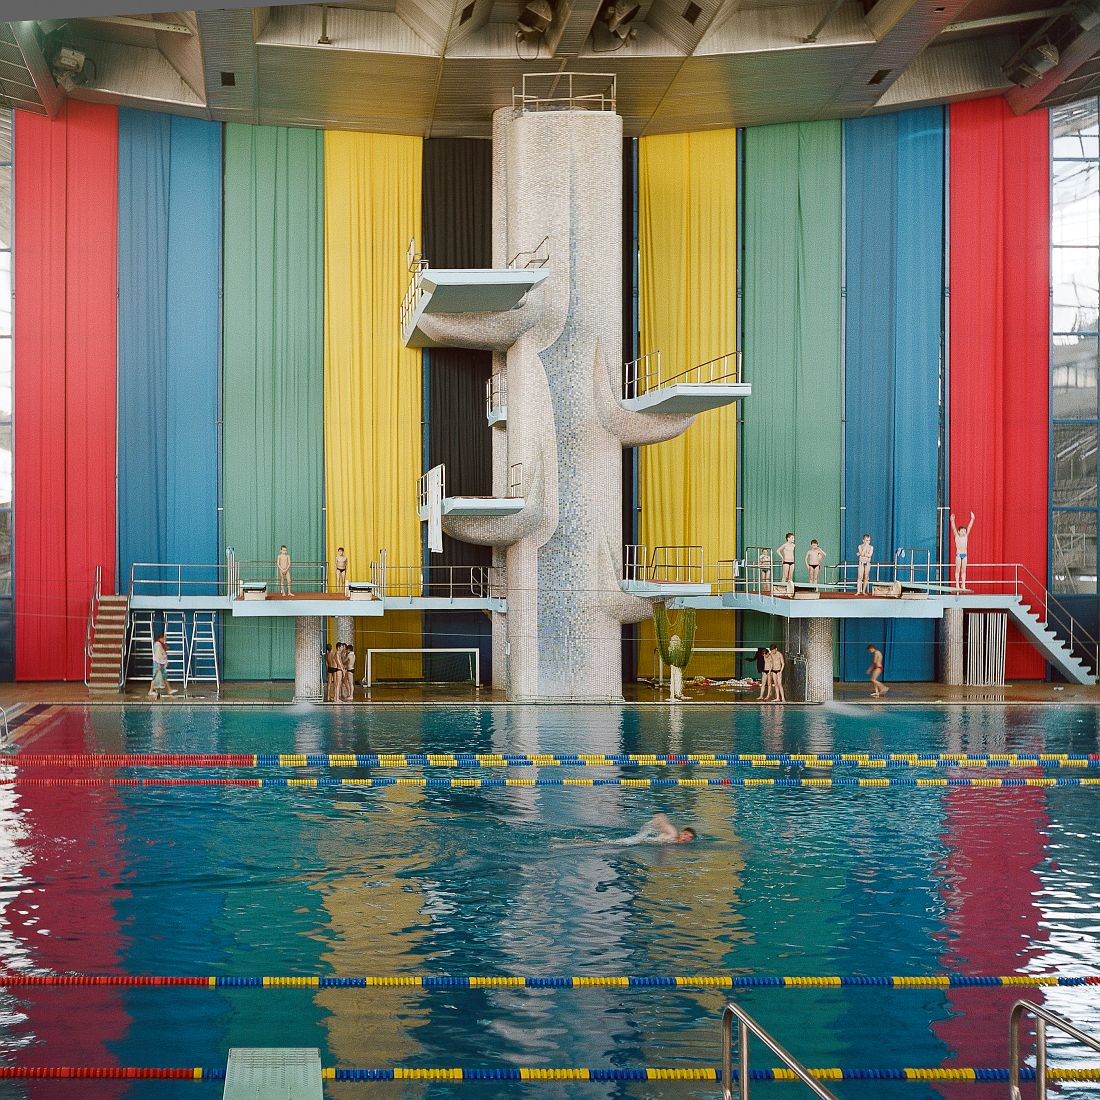 Interior of a swimming pool at Moscow Olympiysky Sports Complex. The sports complex completed in 1980 remains the largest stadium in Europe. During Moscow Olympics it hosted tournaments in 22 different disciplines. Currently, apart from being used for sports and musical venues, it hosts offices, bars, clothes market.